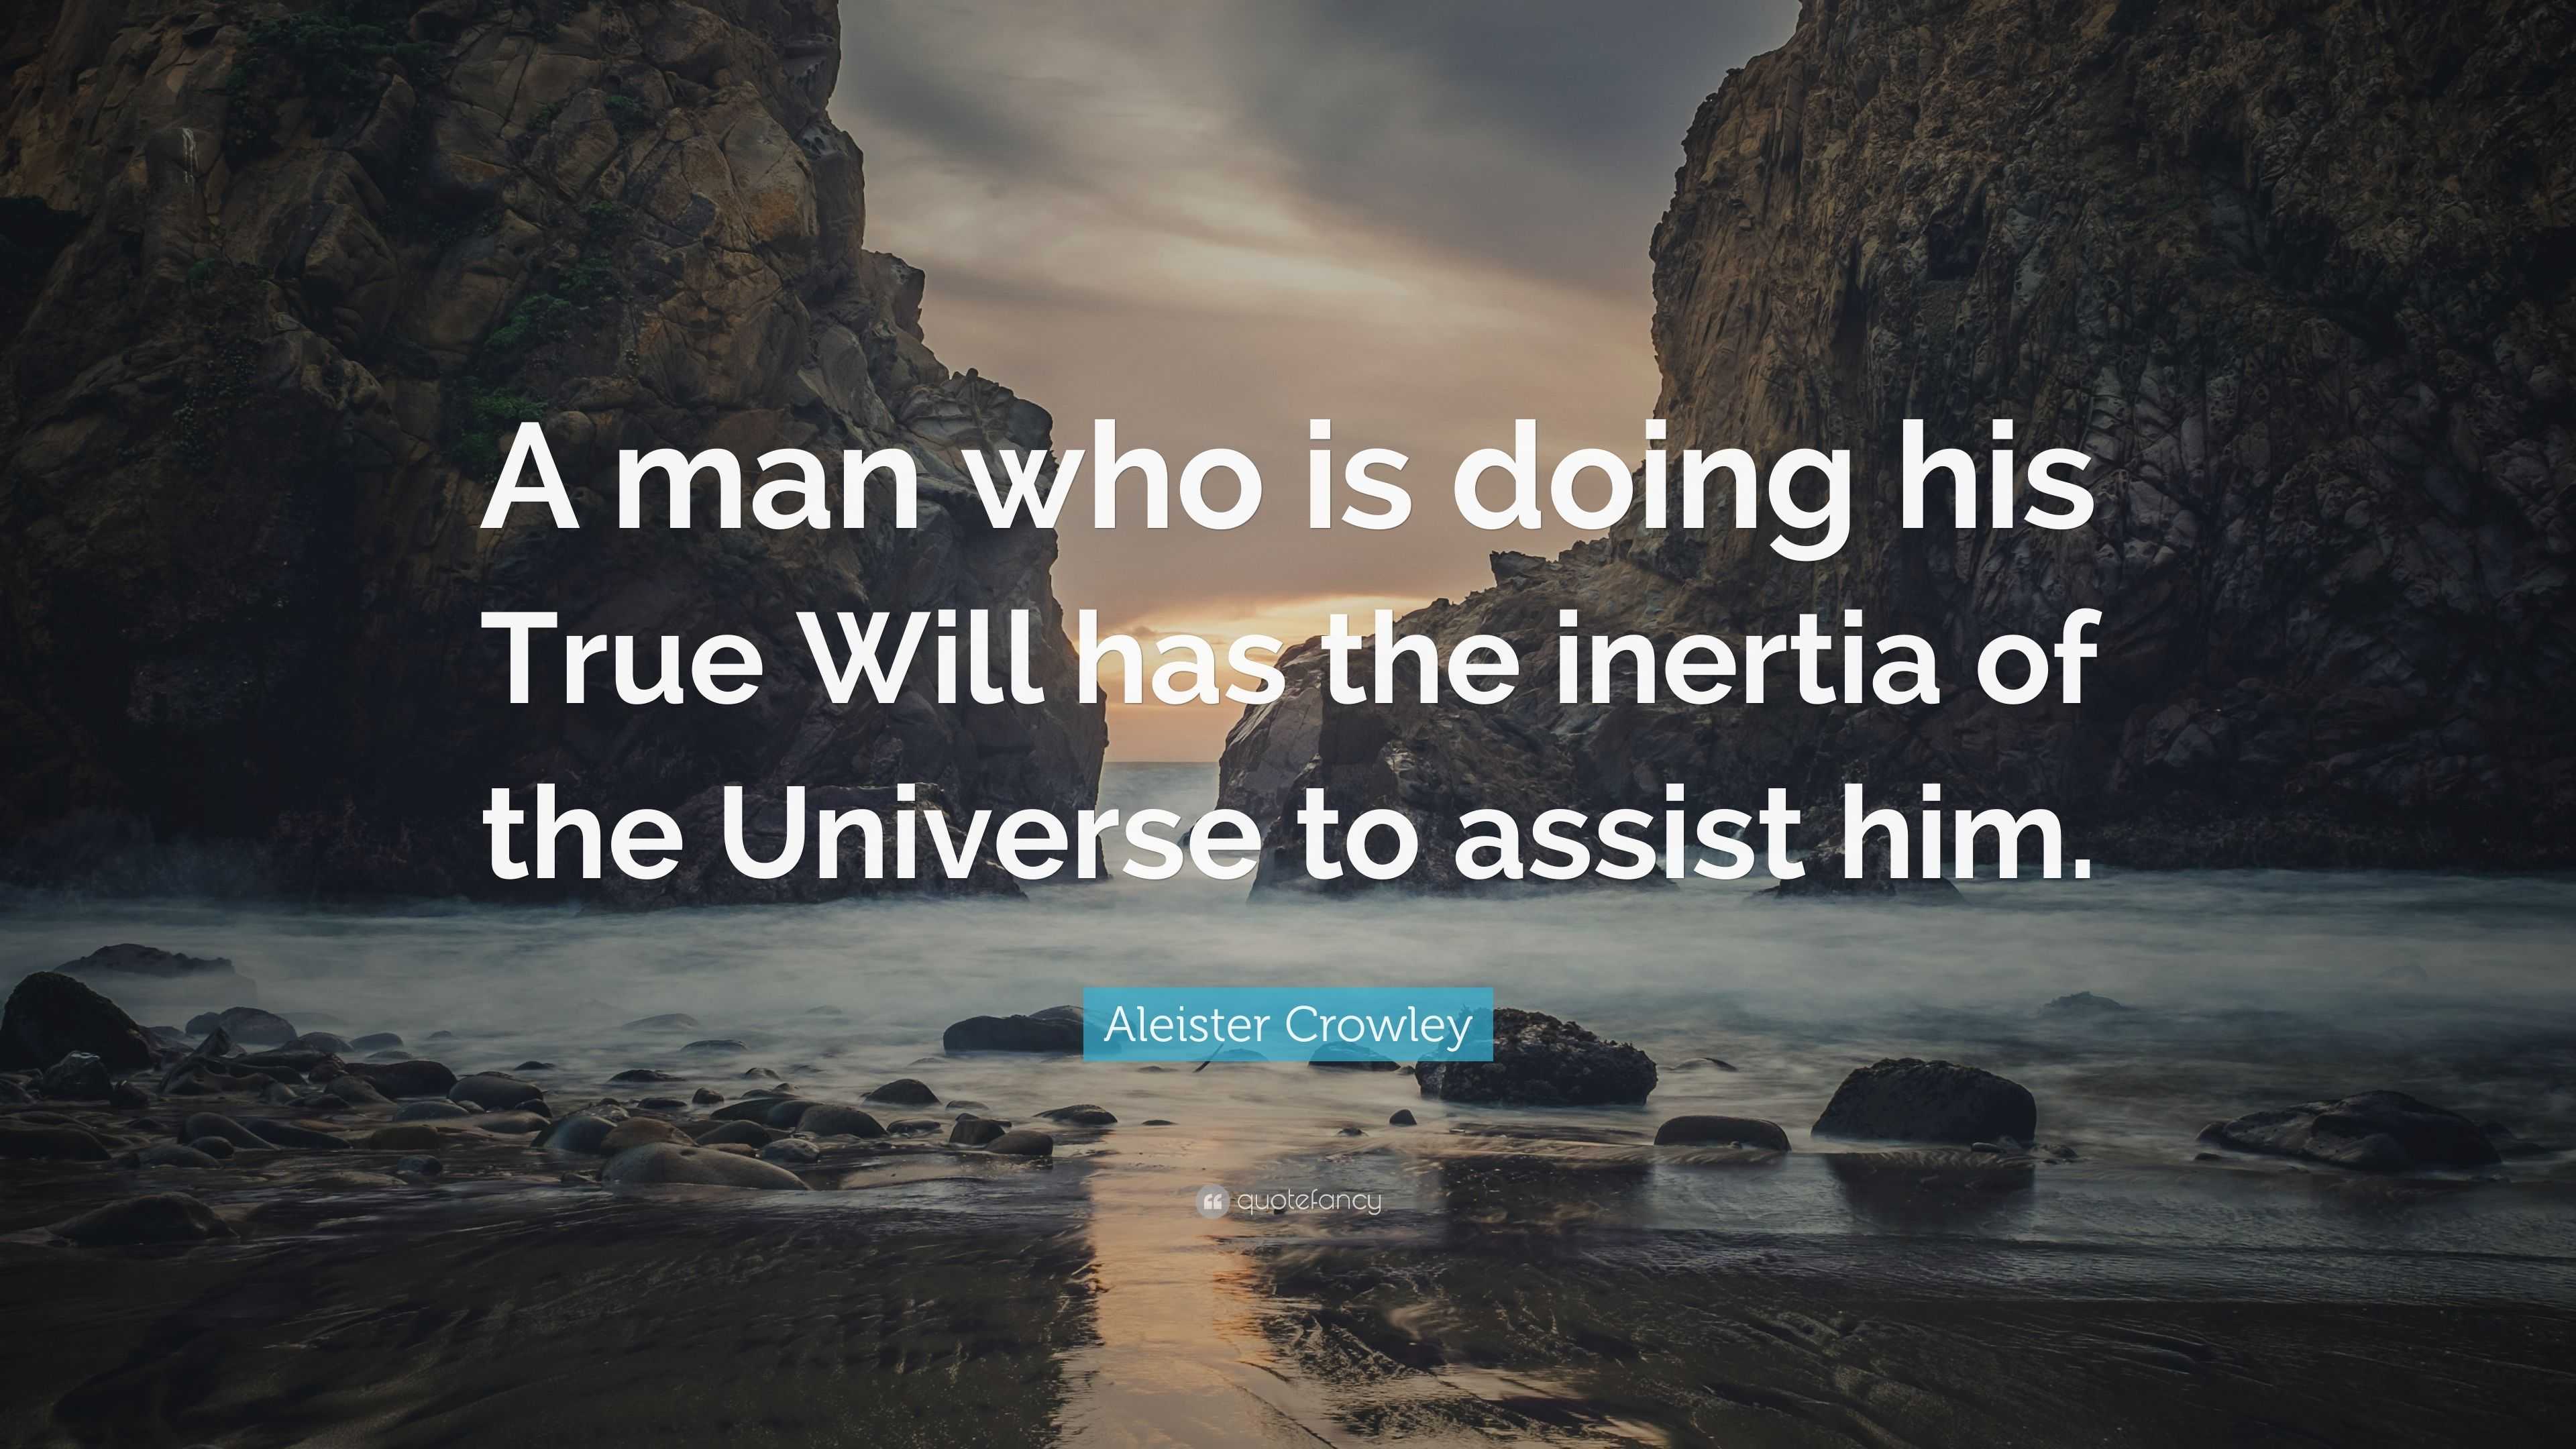 Aleister Crowley Quote “A man who is doing his True Will has the